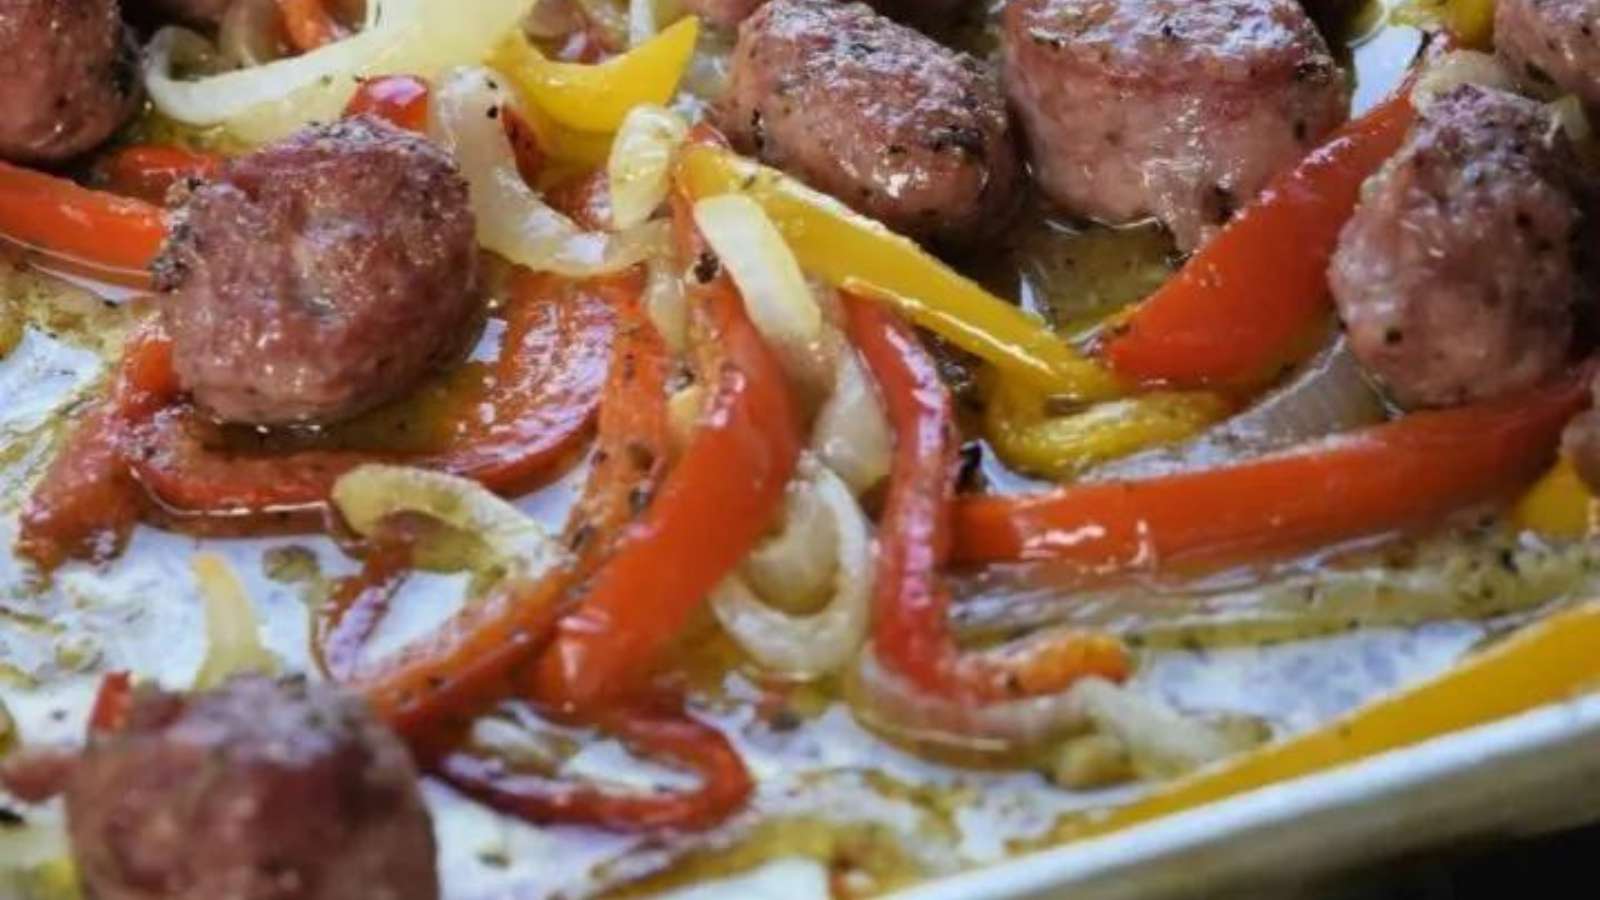 Sausage and peppers on a baking sheet.